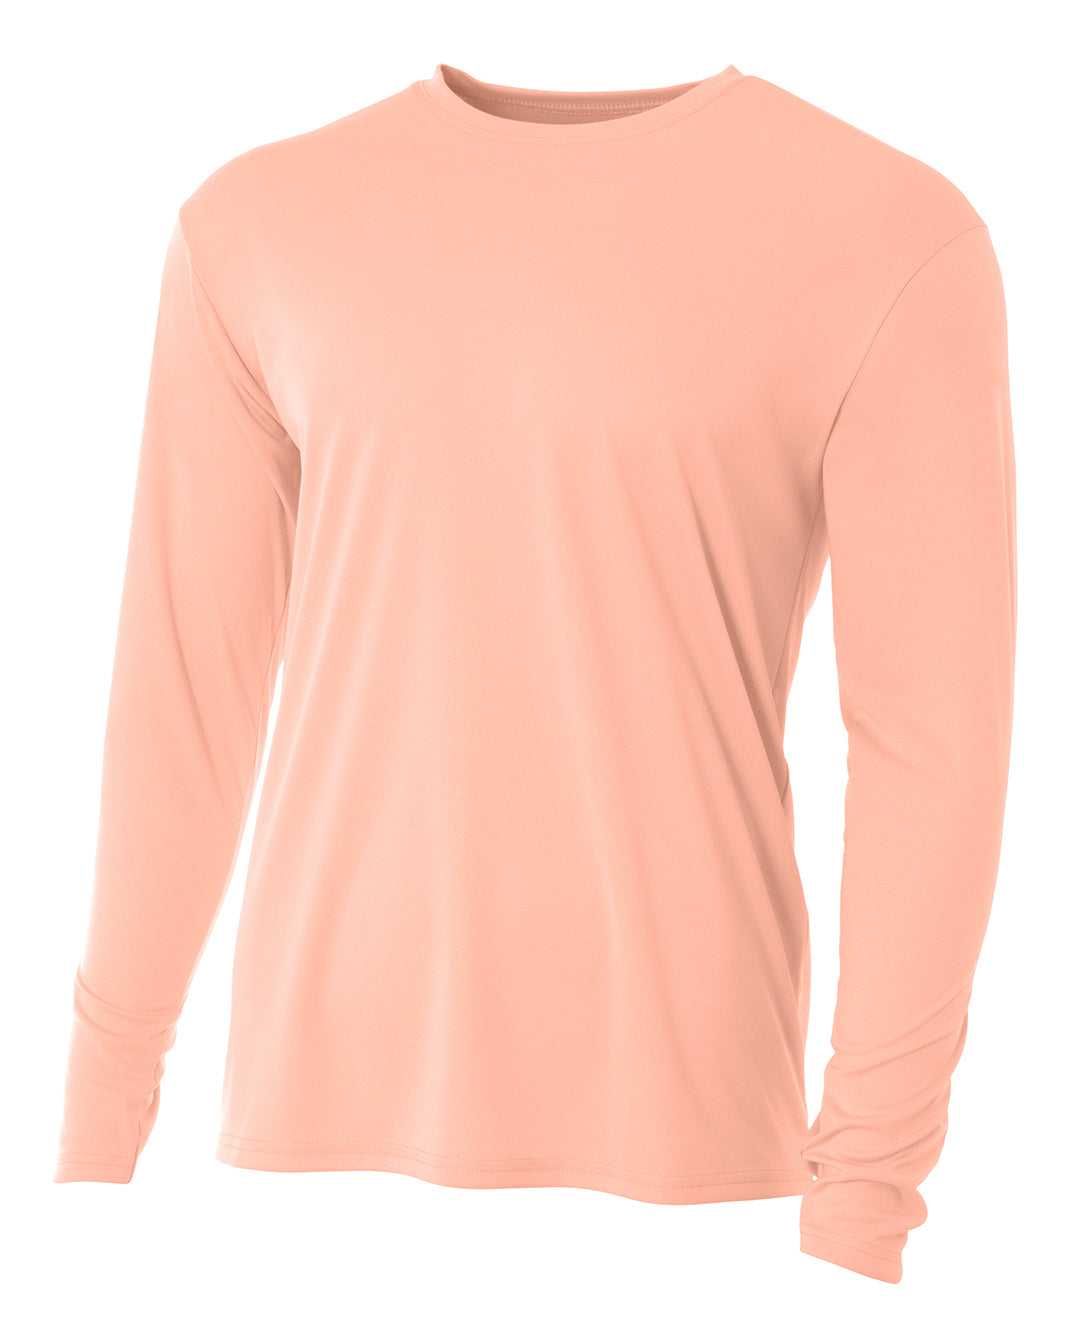 A4 NB3165 Youth Long Sleeve Cooling Performance Crew T-Shirt - Salmon